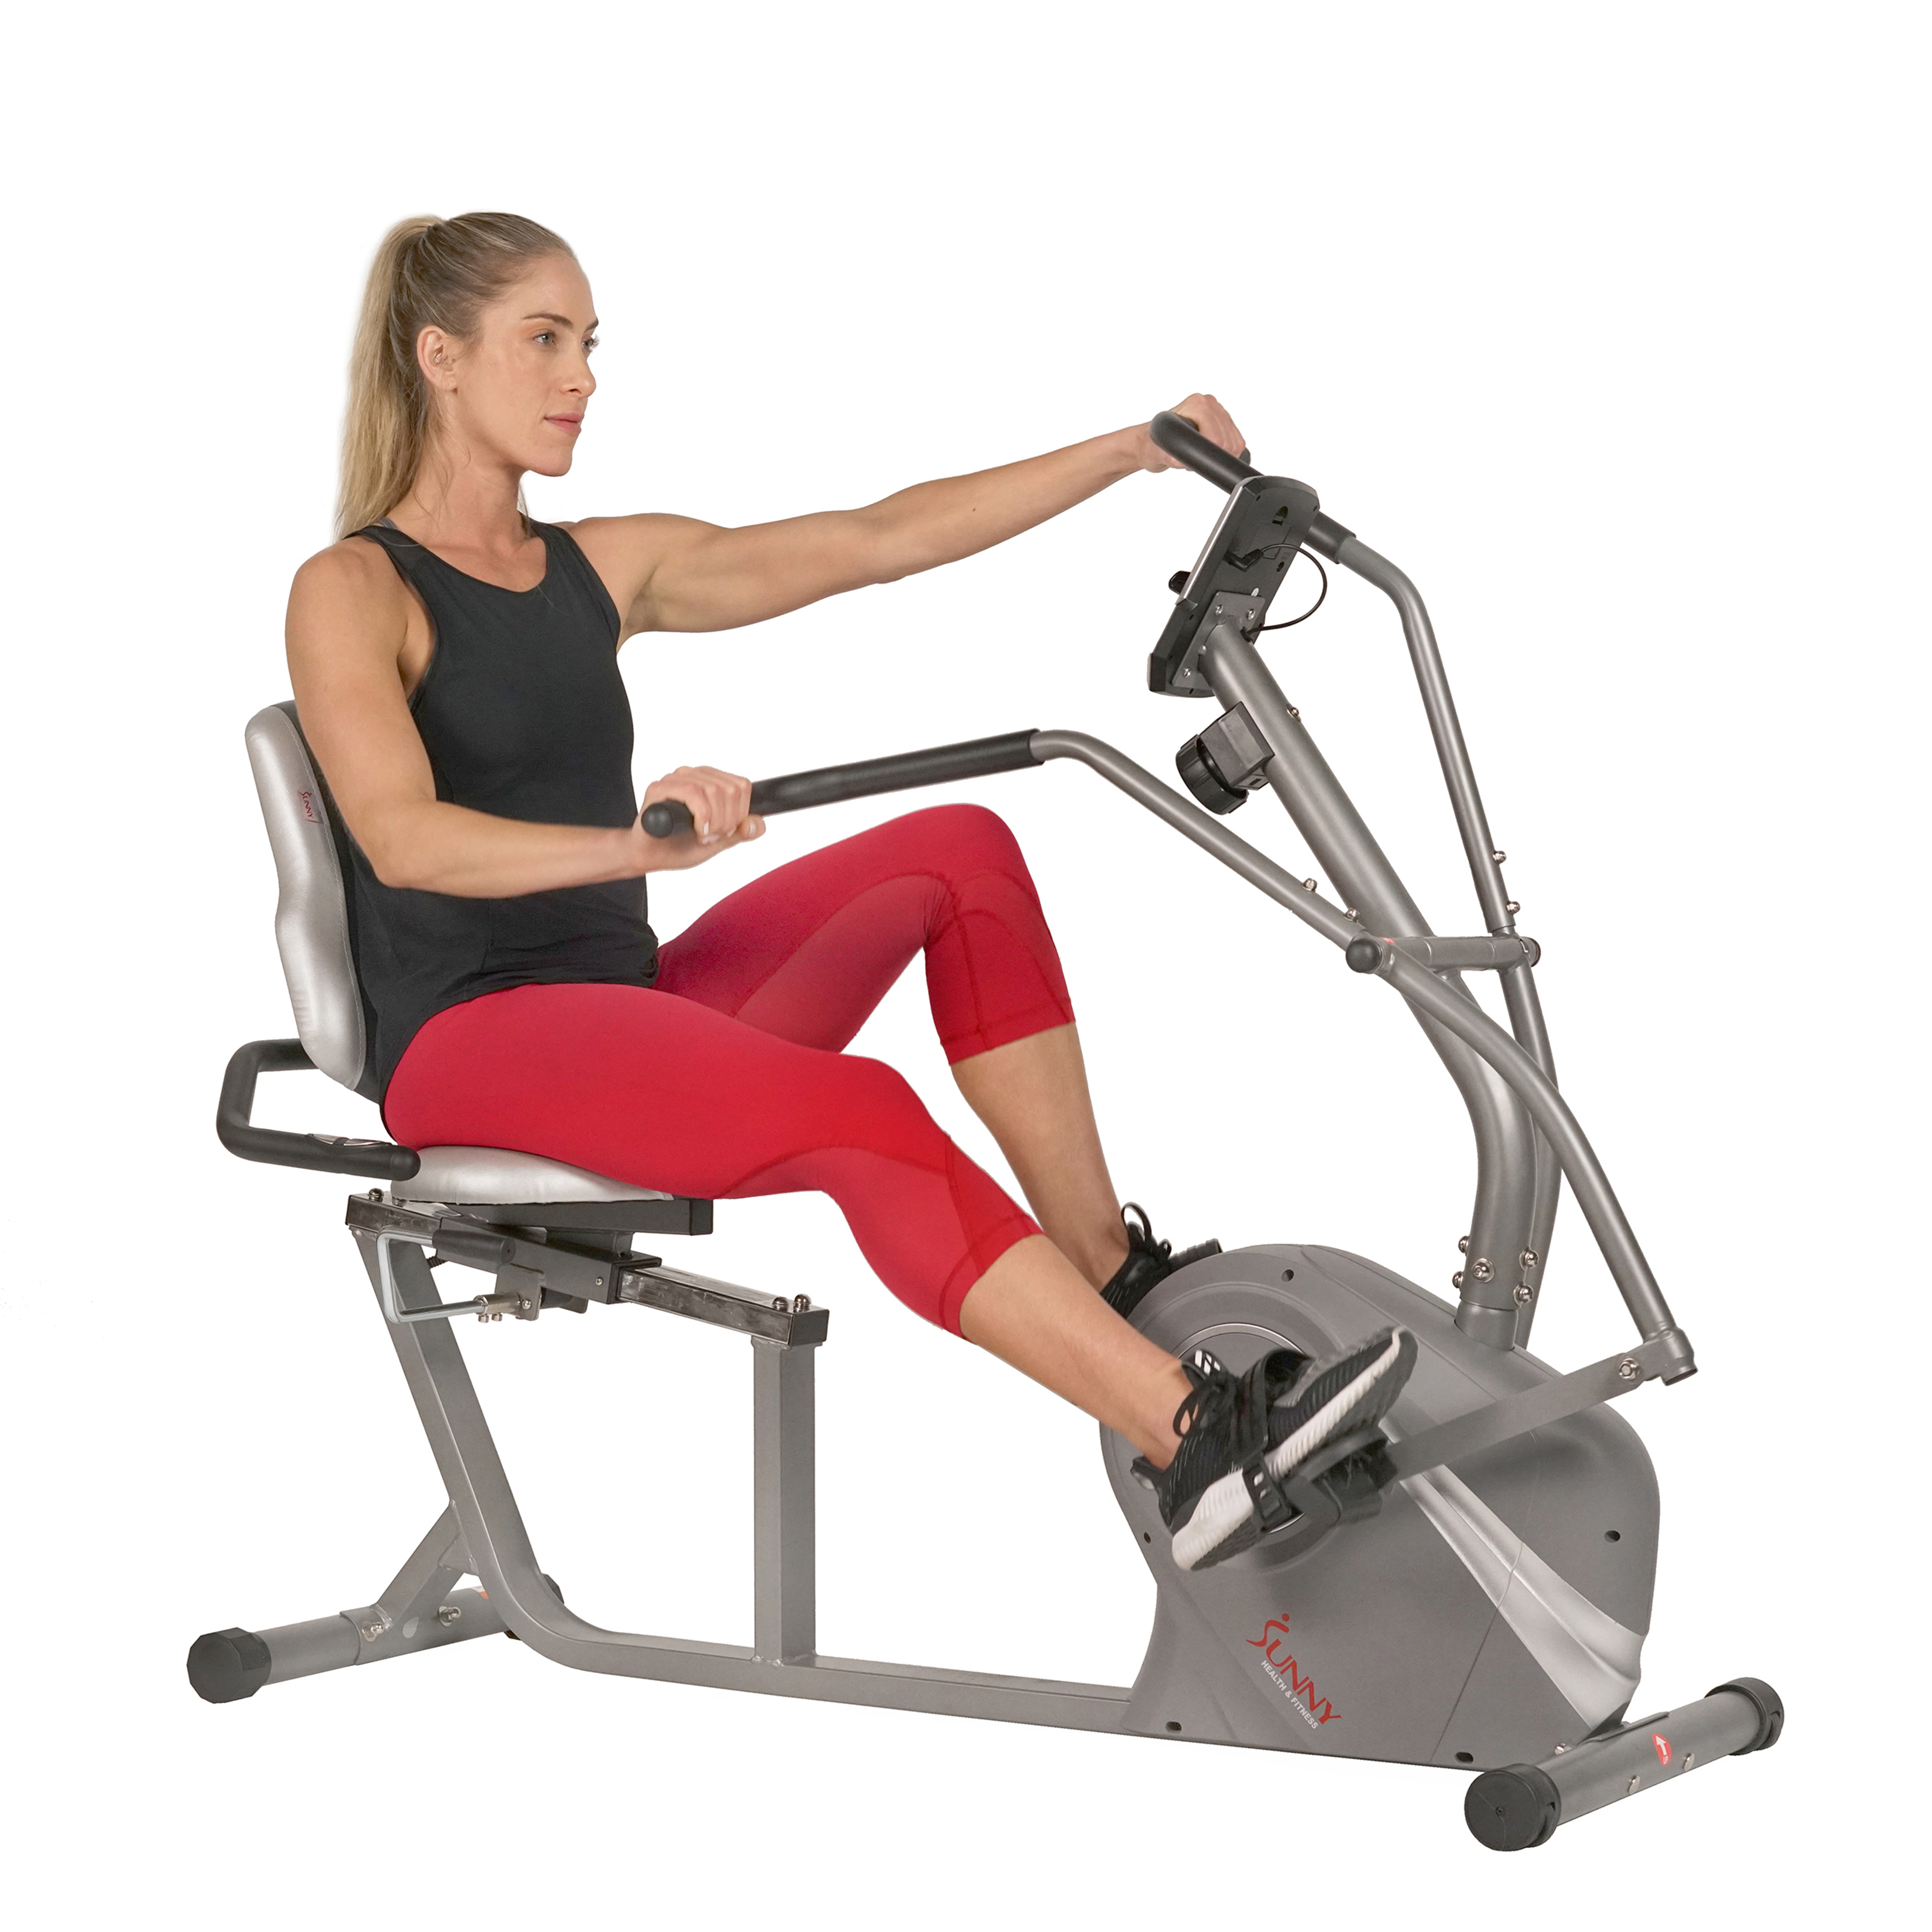 Sunny Health & Fitness Cross Trainer Magnetic Recumbent Bike with Arm Exercisers - SF-RB4936 - image 1 of 11